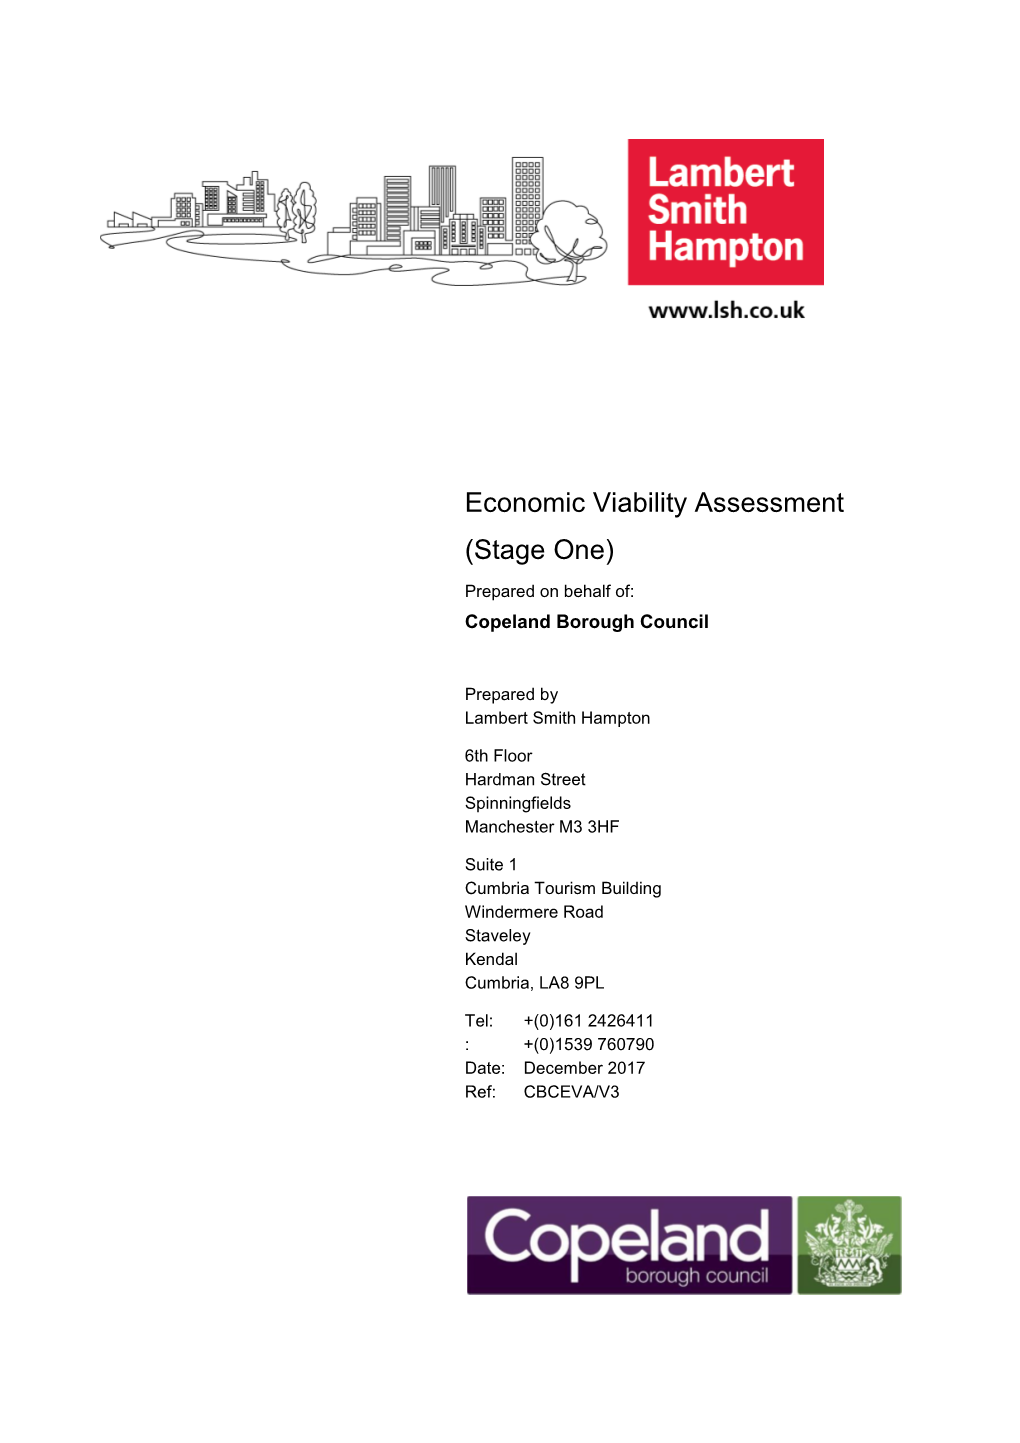 Economic Viability Assessment (Stage One)